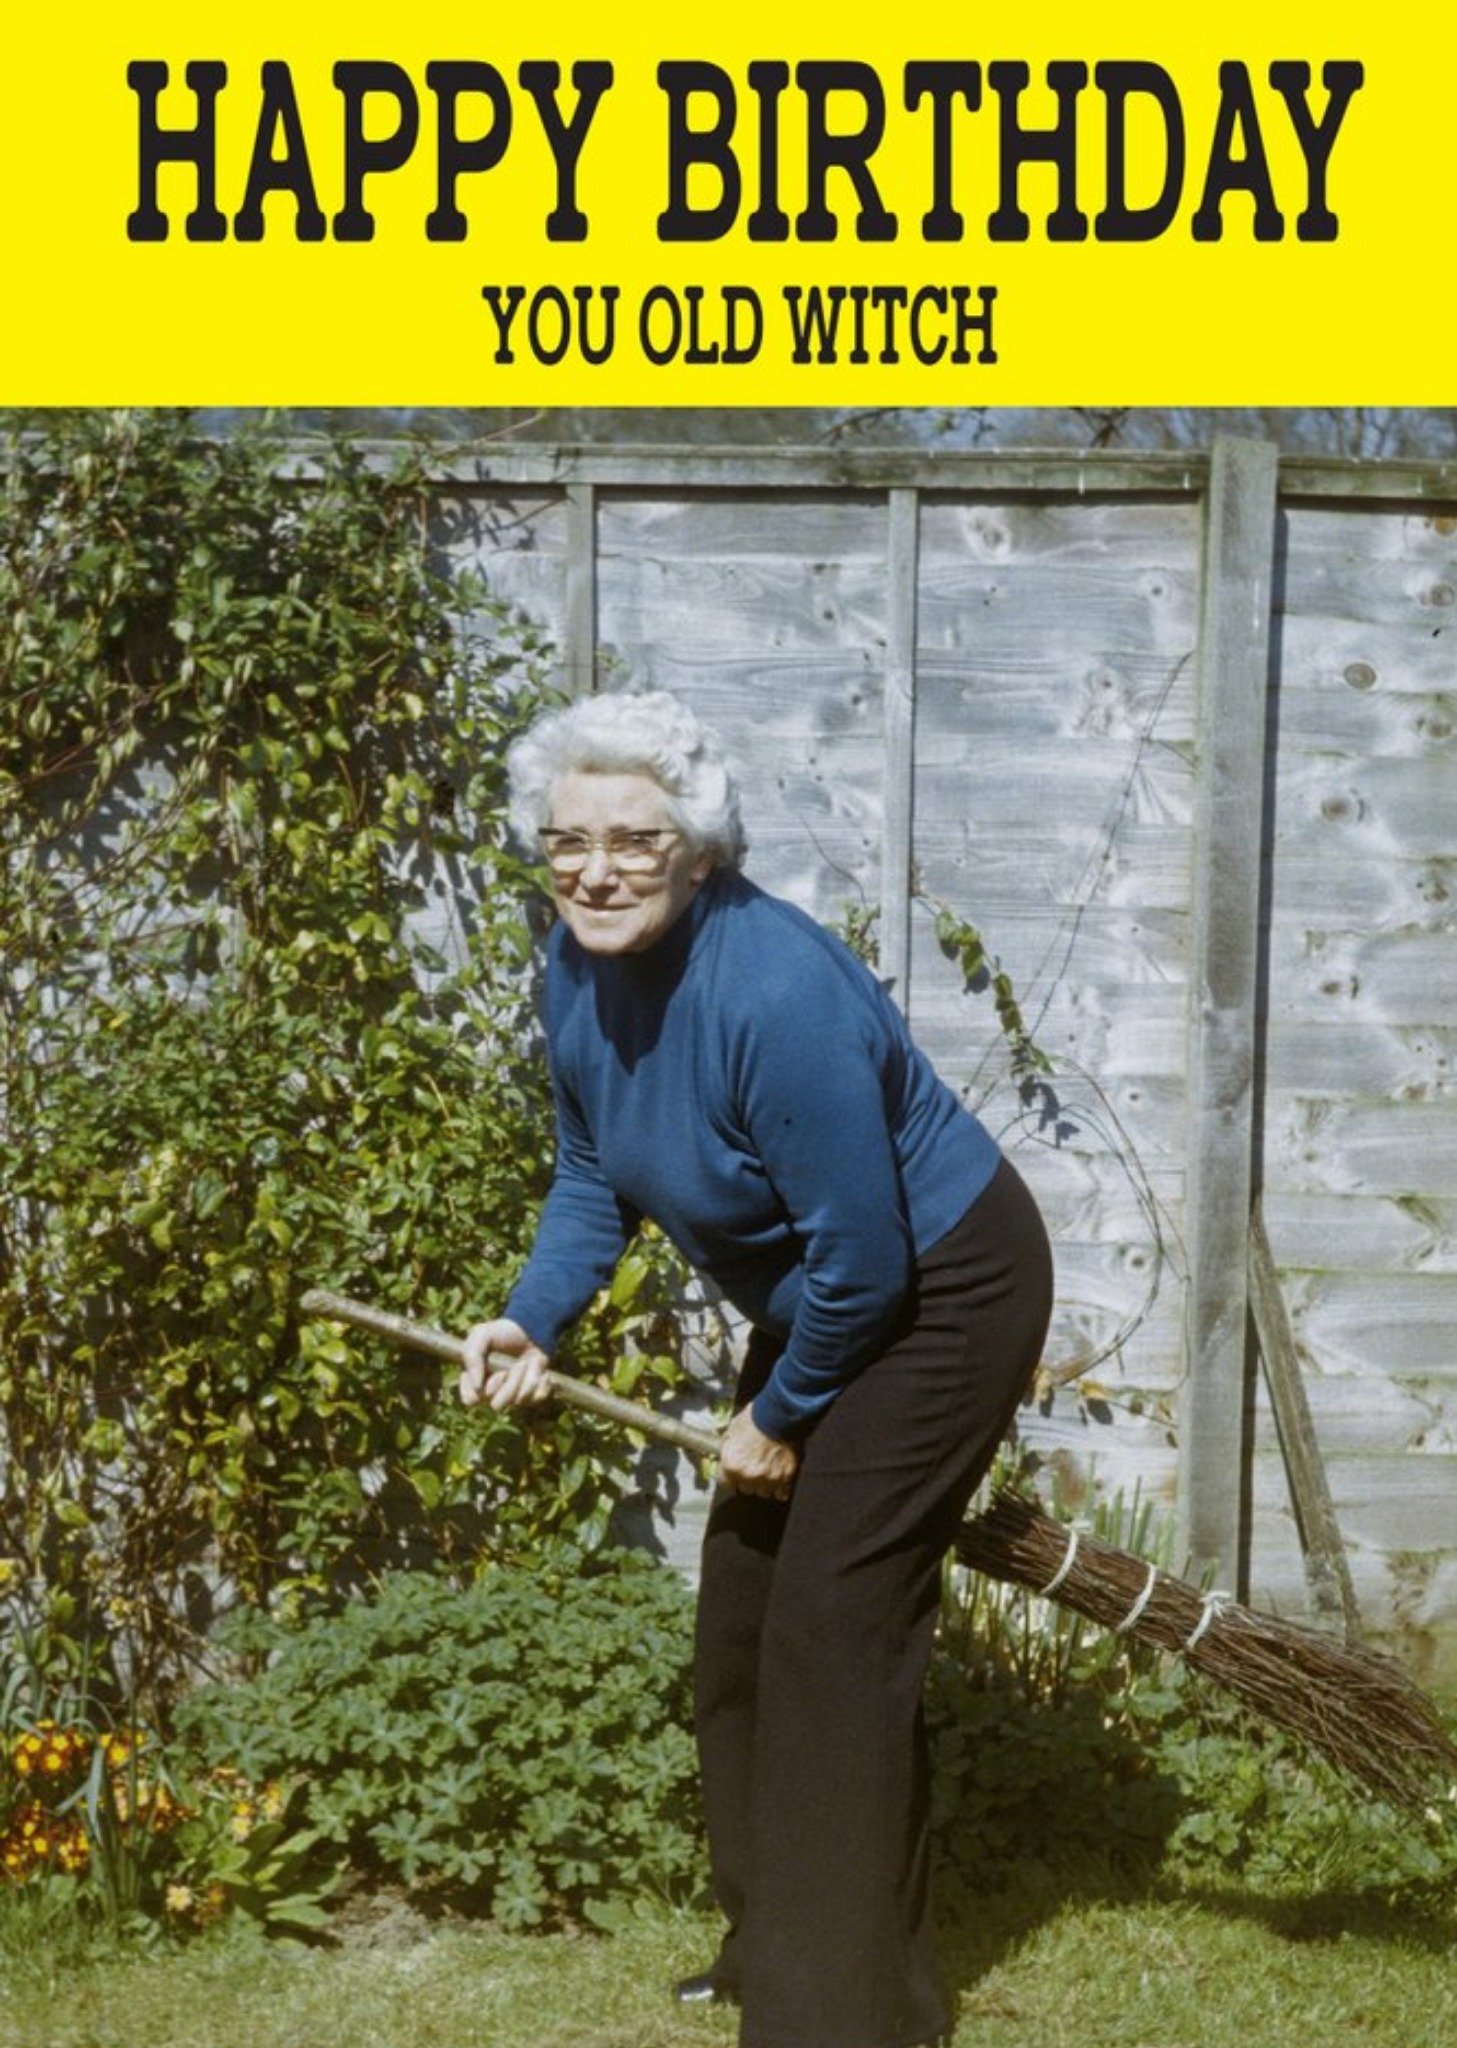 Moonpig Funny Cheeky Chops Happy Birthday You Old Witch Card Ecard